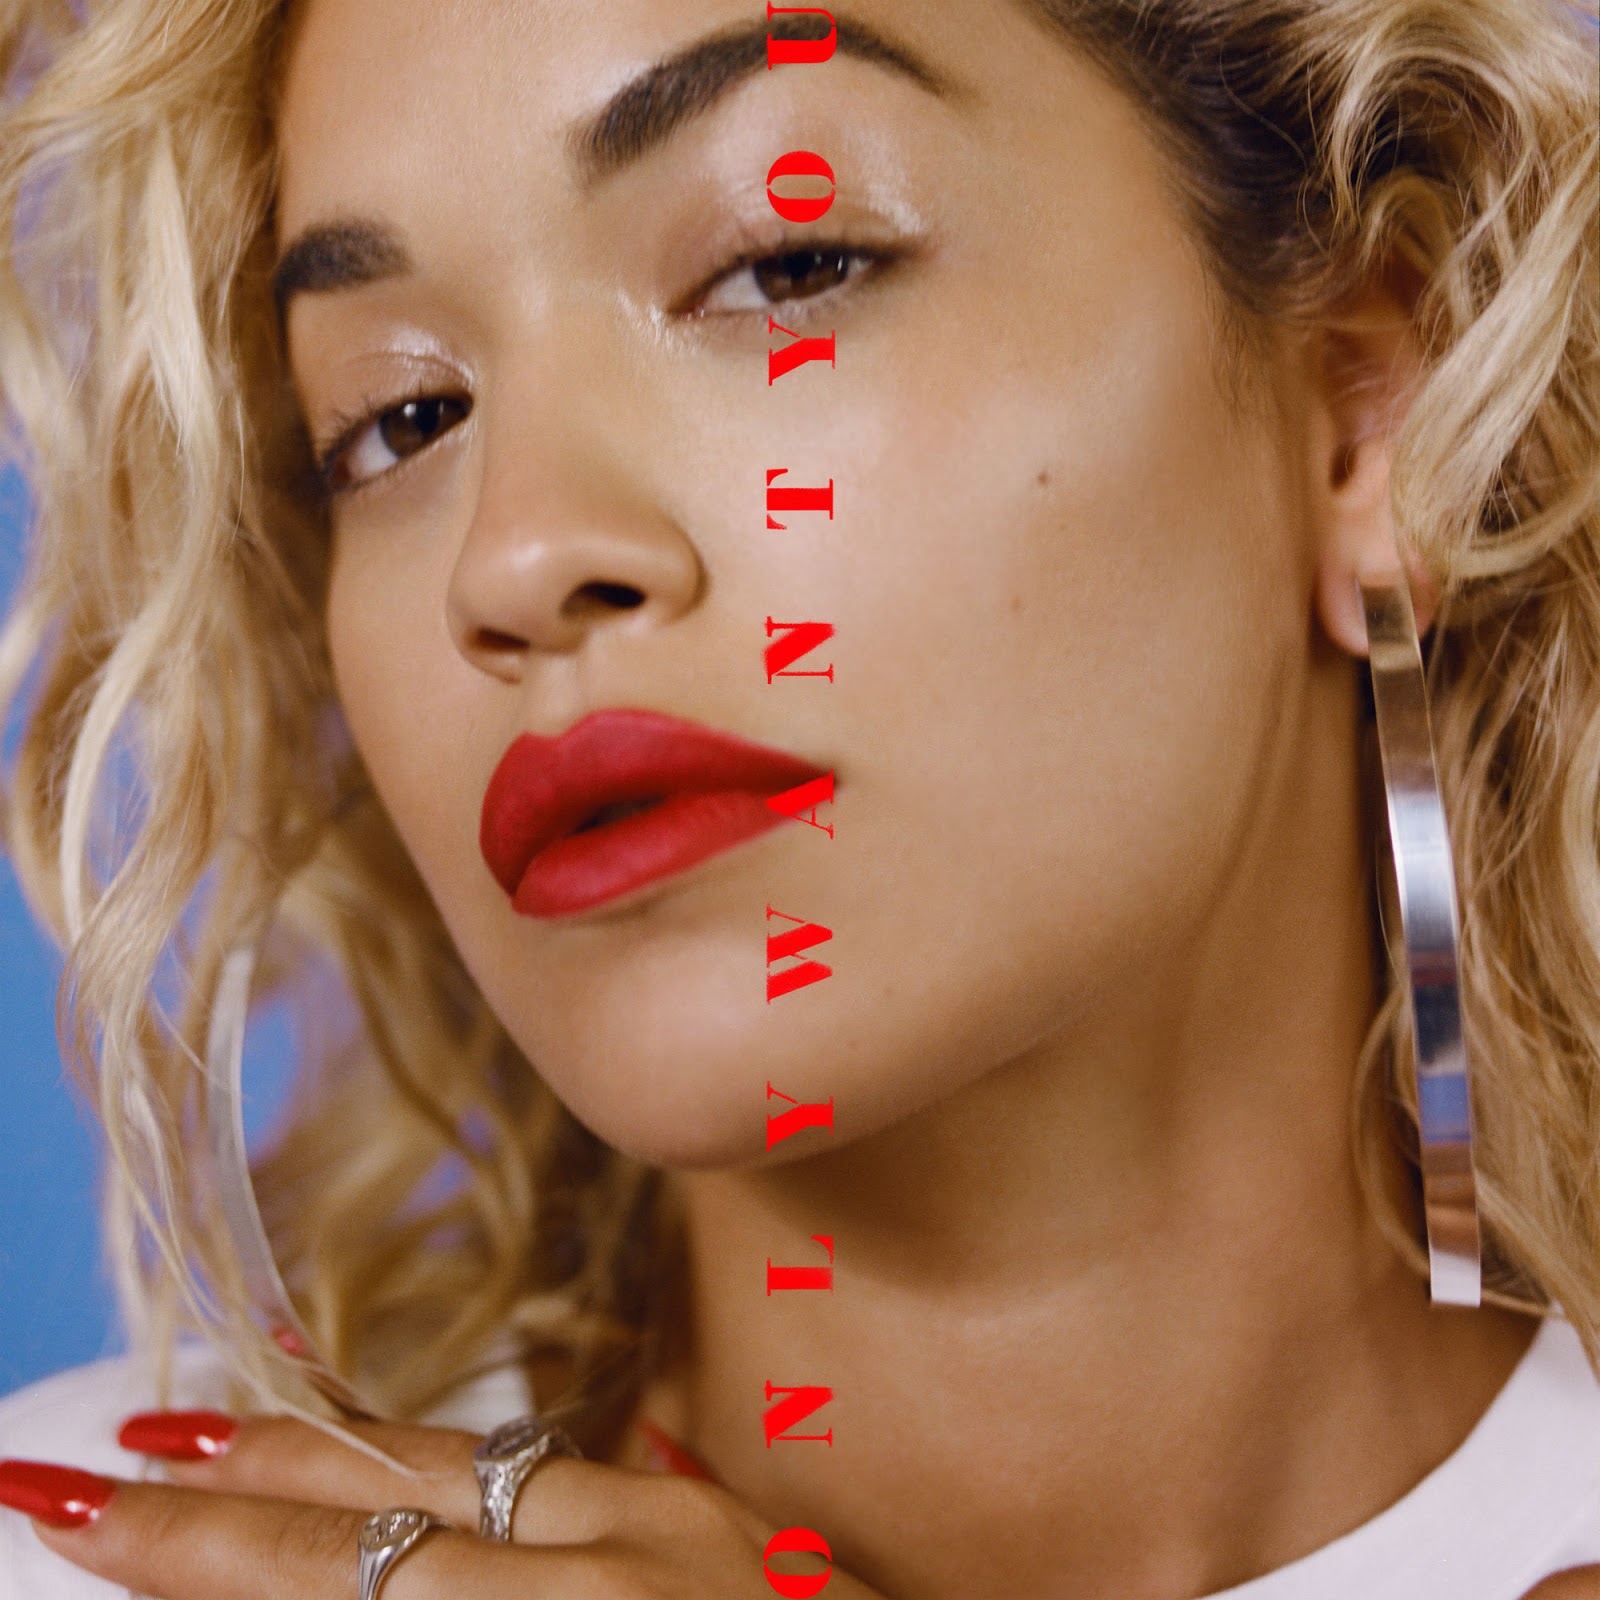 Rita Ora - Only Want You (feat. 6LACK) (2019) - Single [ITunes Plus AAC M4A]